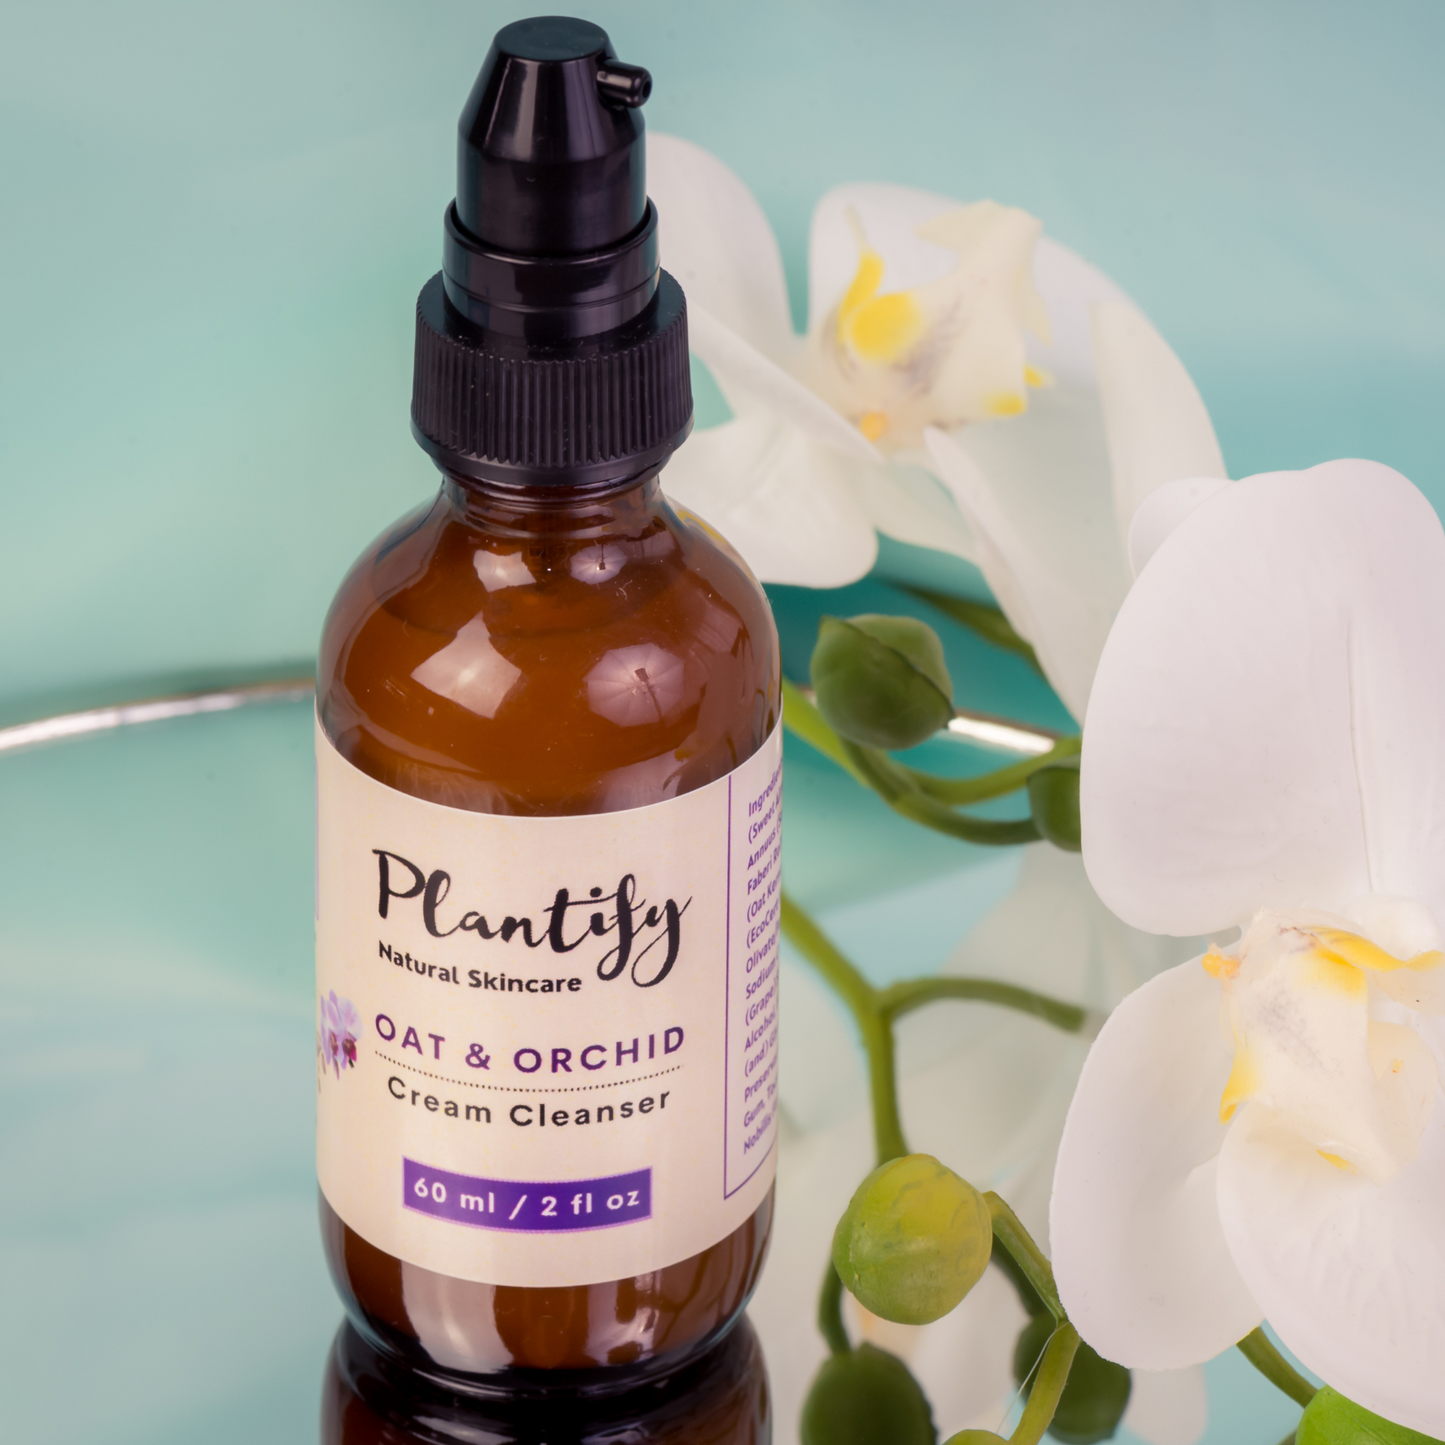 Oat & Orchid Cream Cleanser